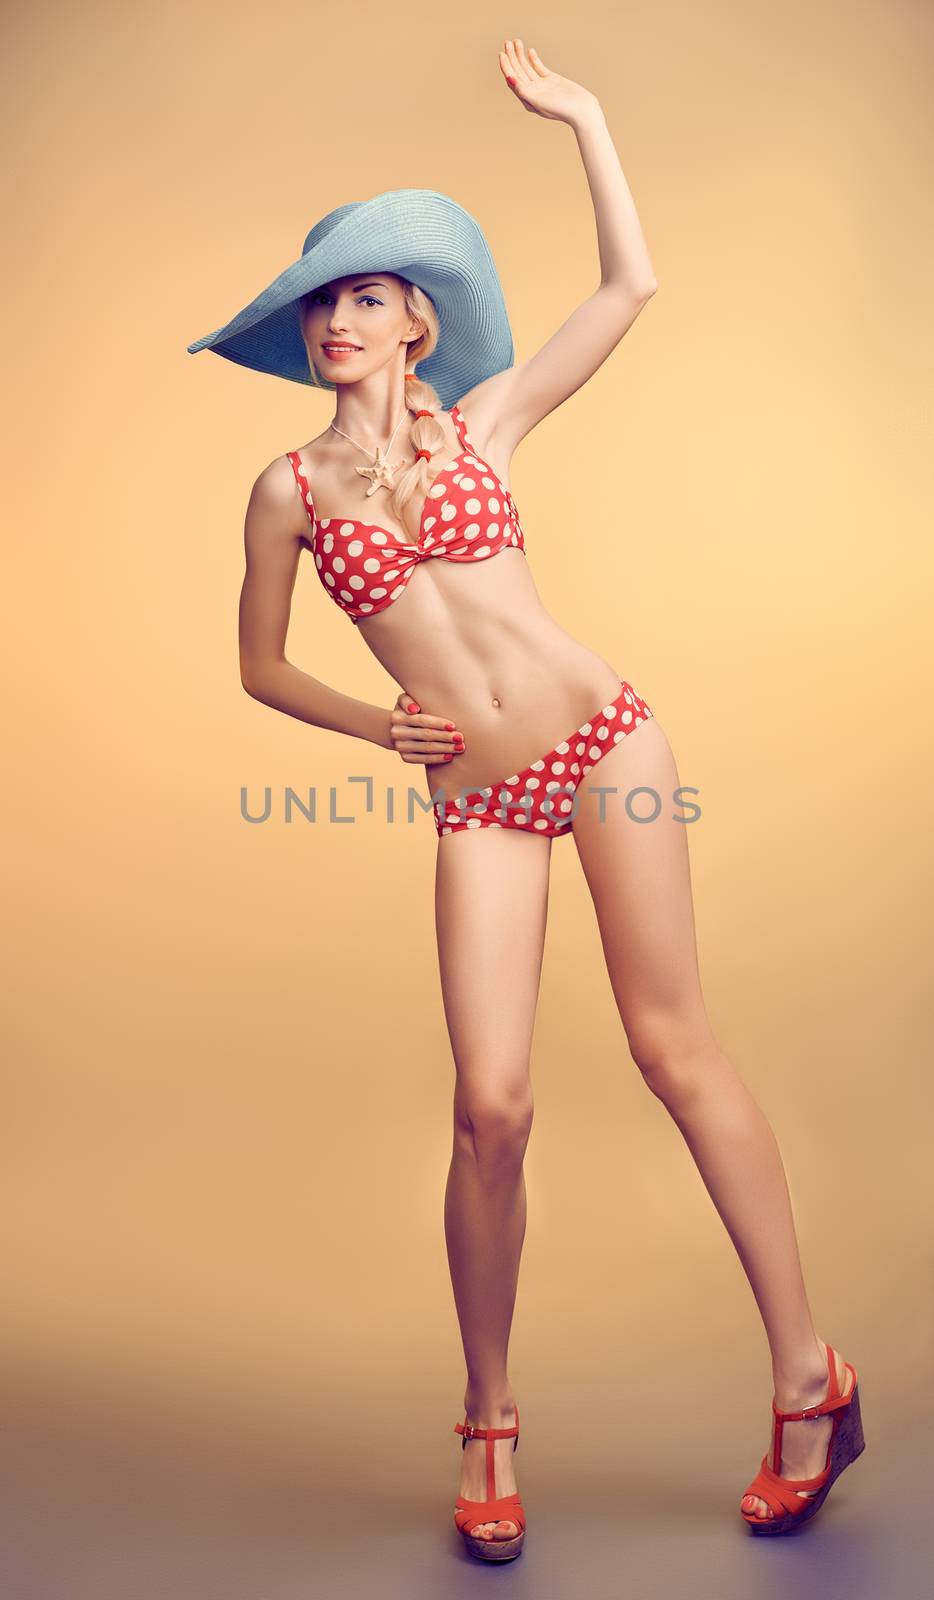 Sexy PinUp woman in fashion red polka dots swimsuit, blue hat, beach slim body. Playful blonde girl in bikini smiling. Summer holiday, sea vacation. Yellow, vintage toned, unusual creative provocative